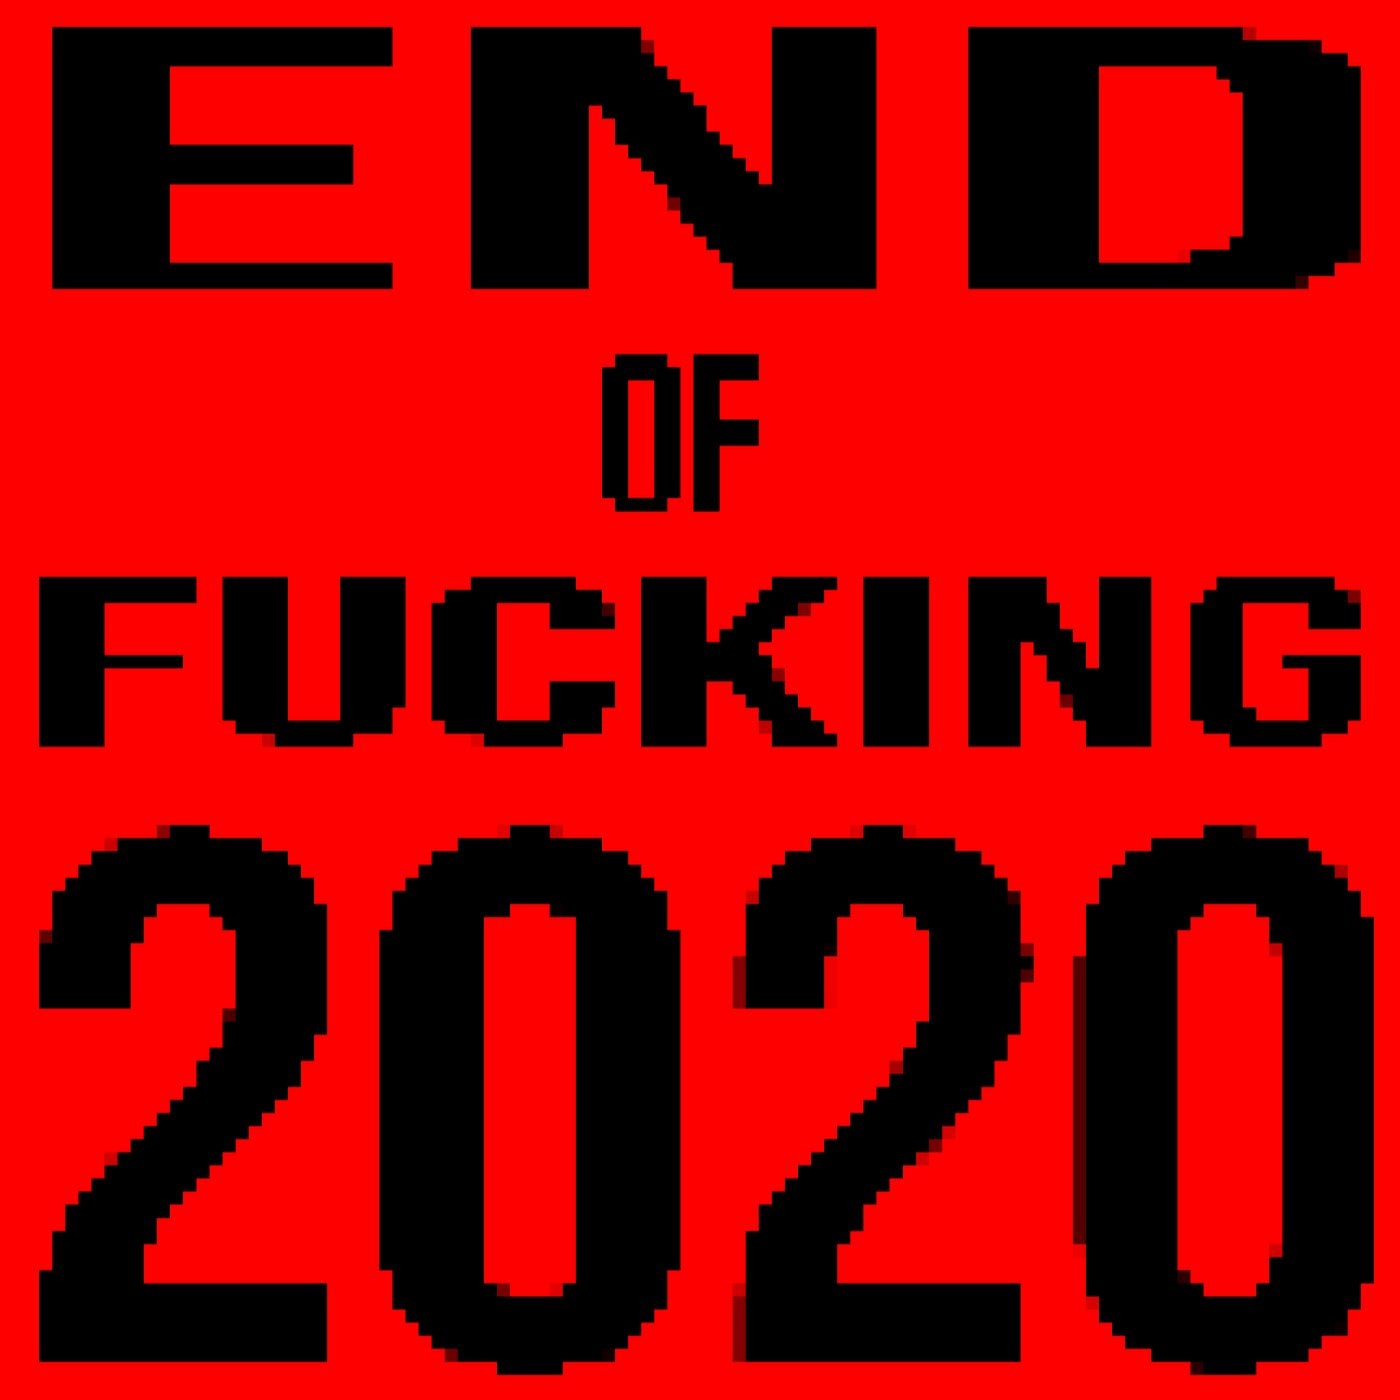 End of Fucking 2020, Vol. 2